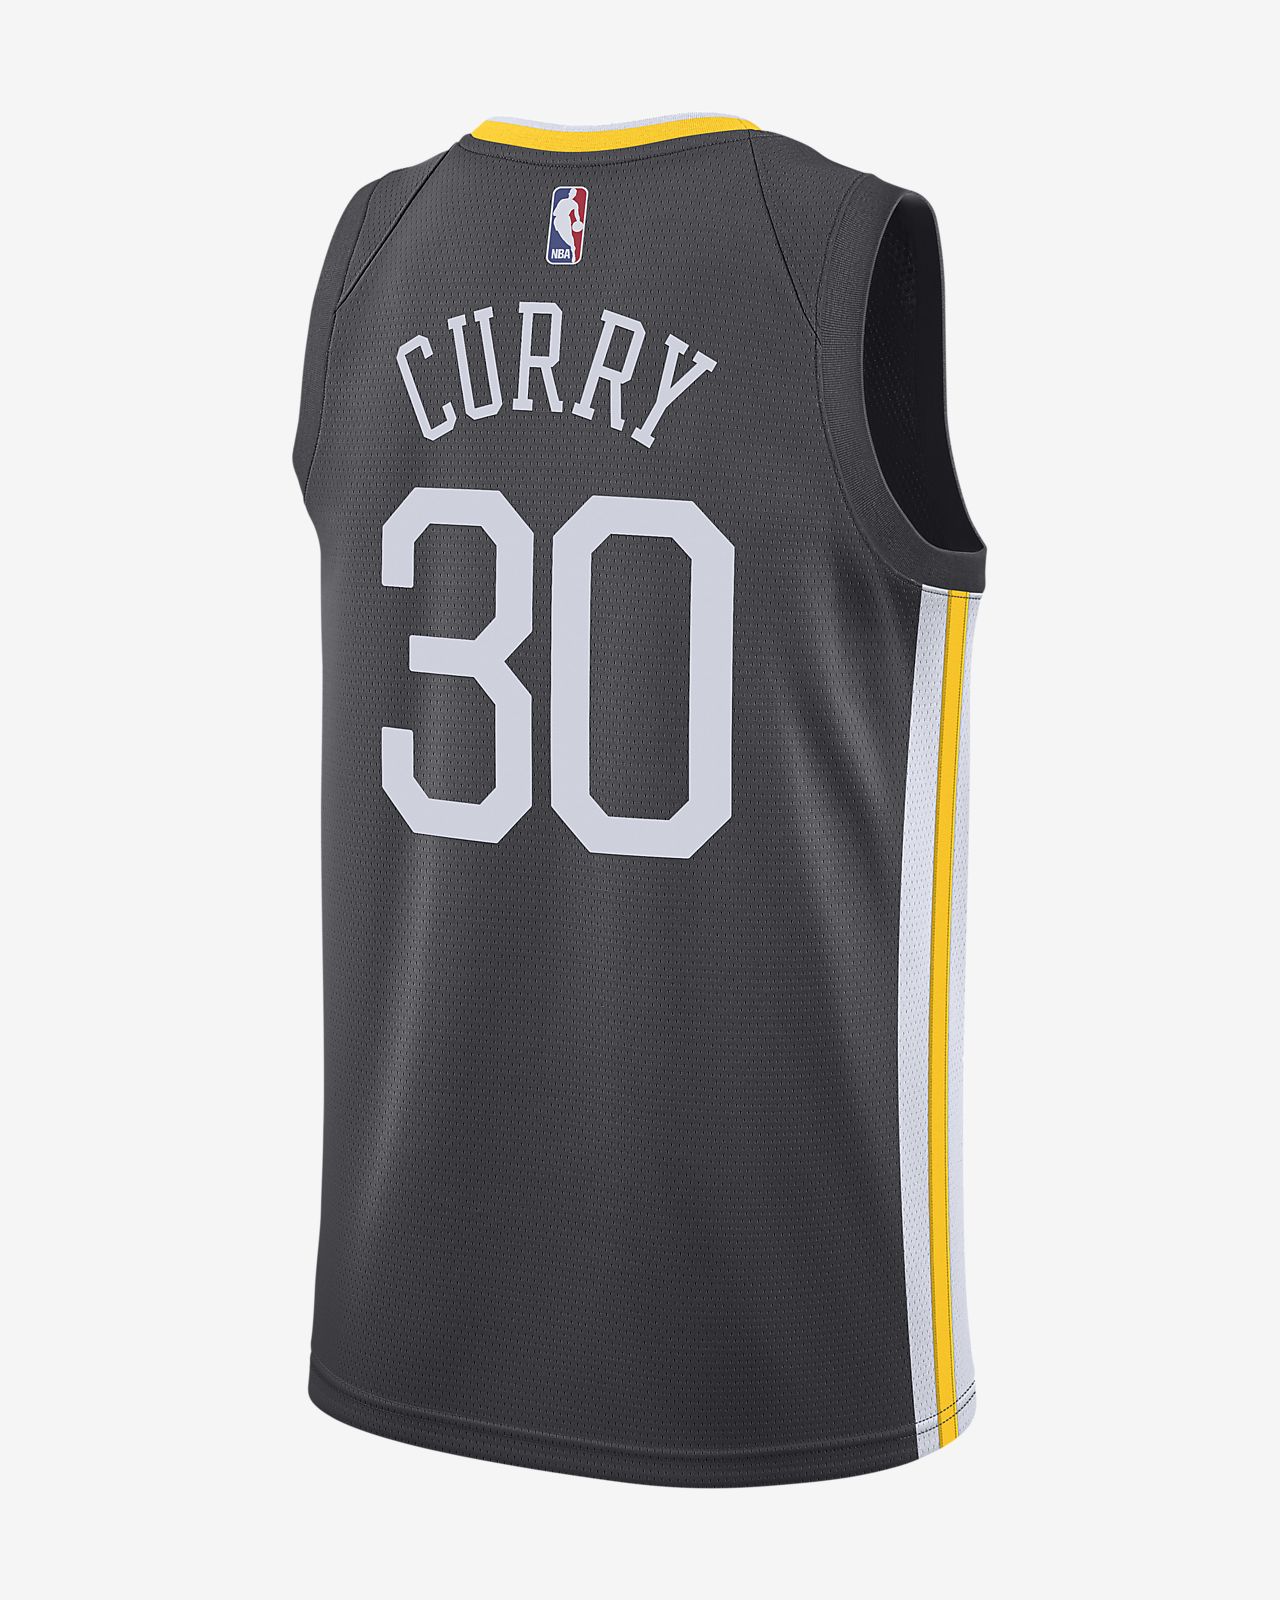 steph curry men's jersey